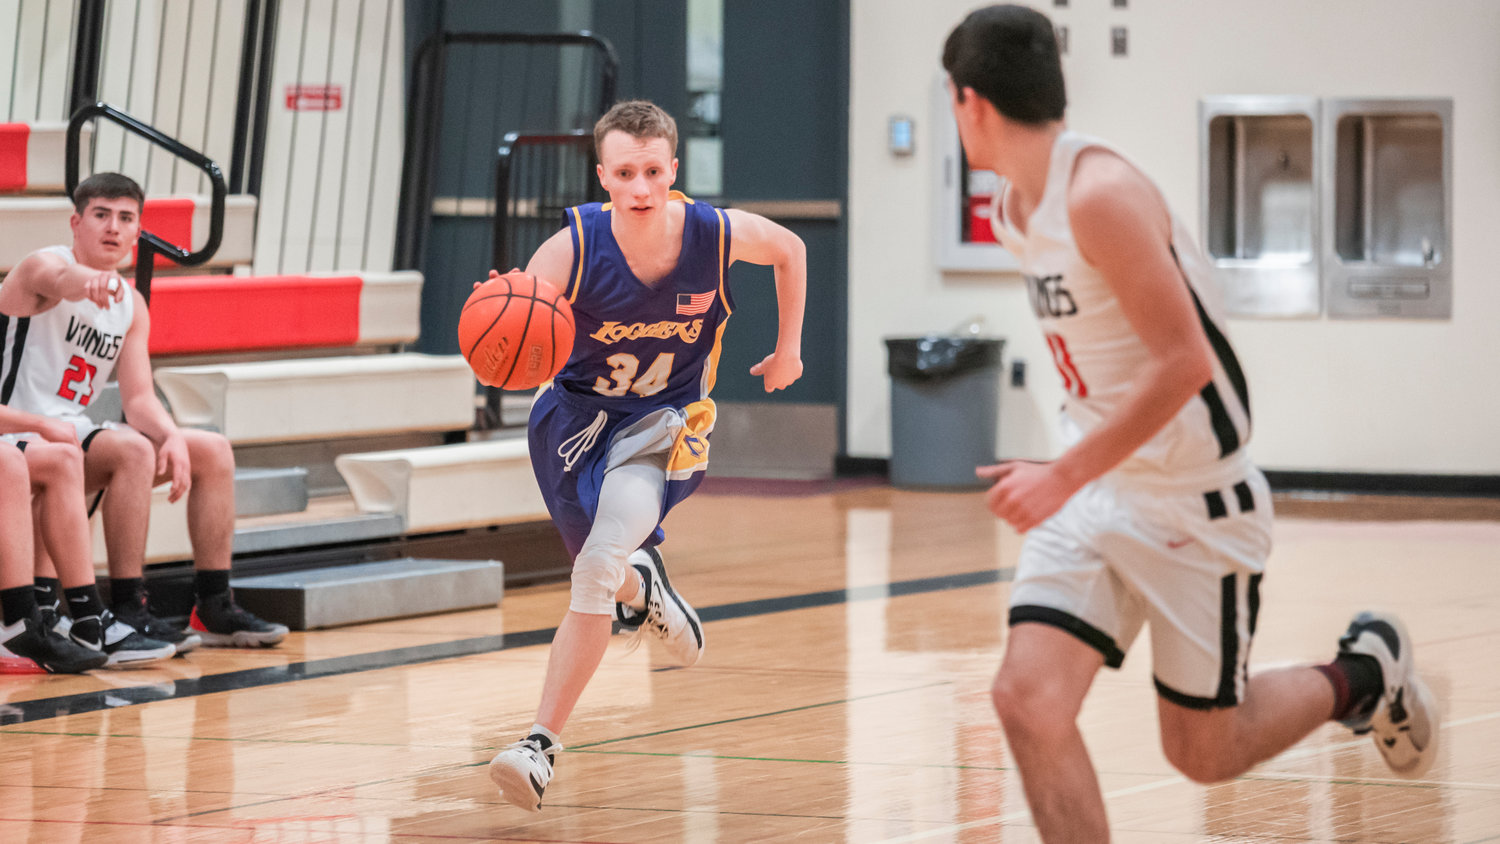 Onalaska’s Ben Russon (34) dribbles the ball down court Monday night in Mossyrock.